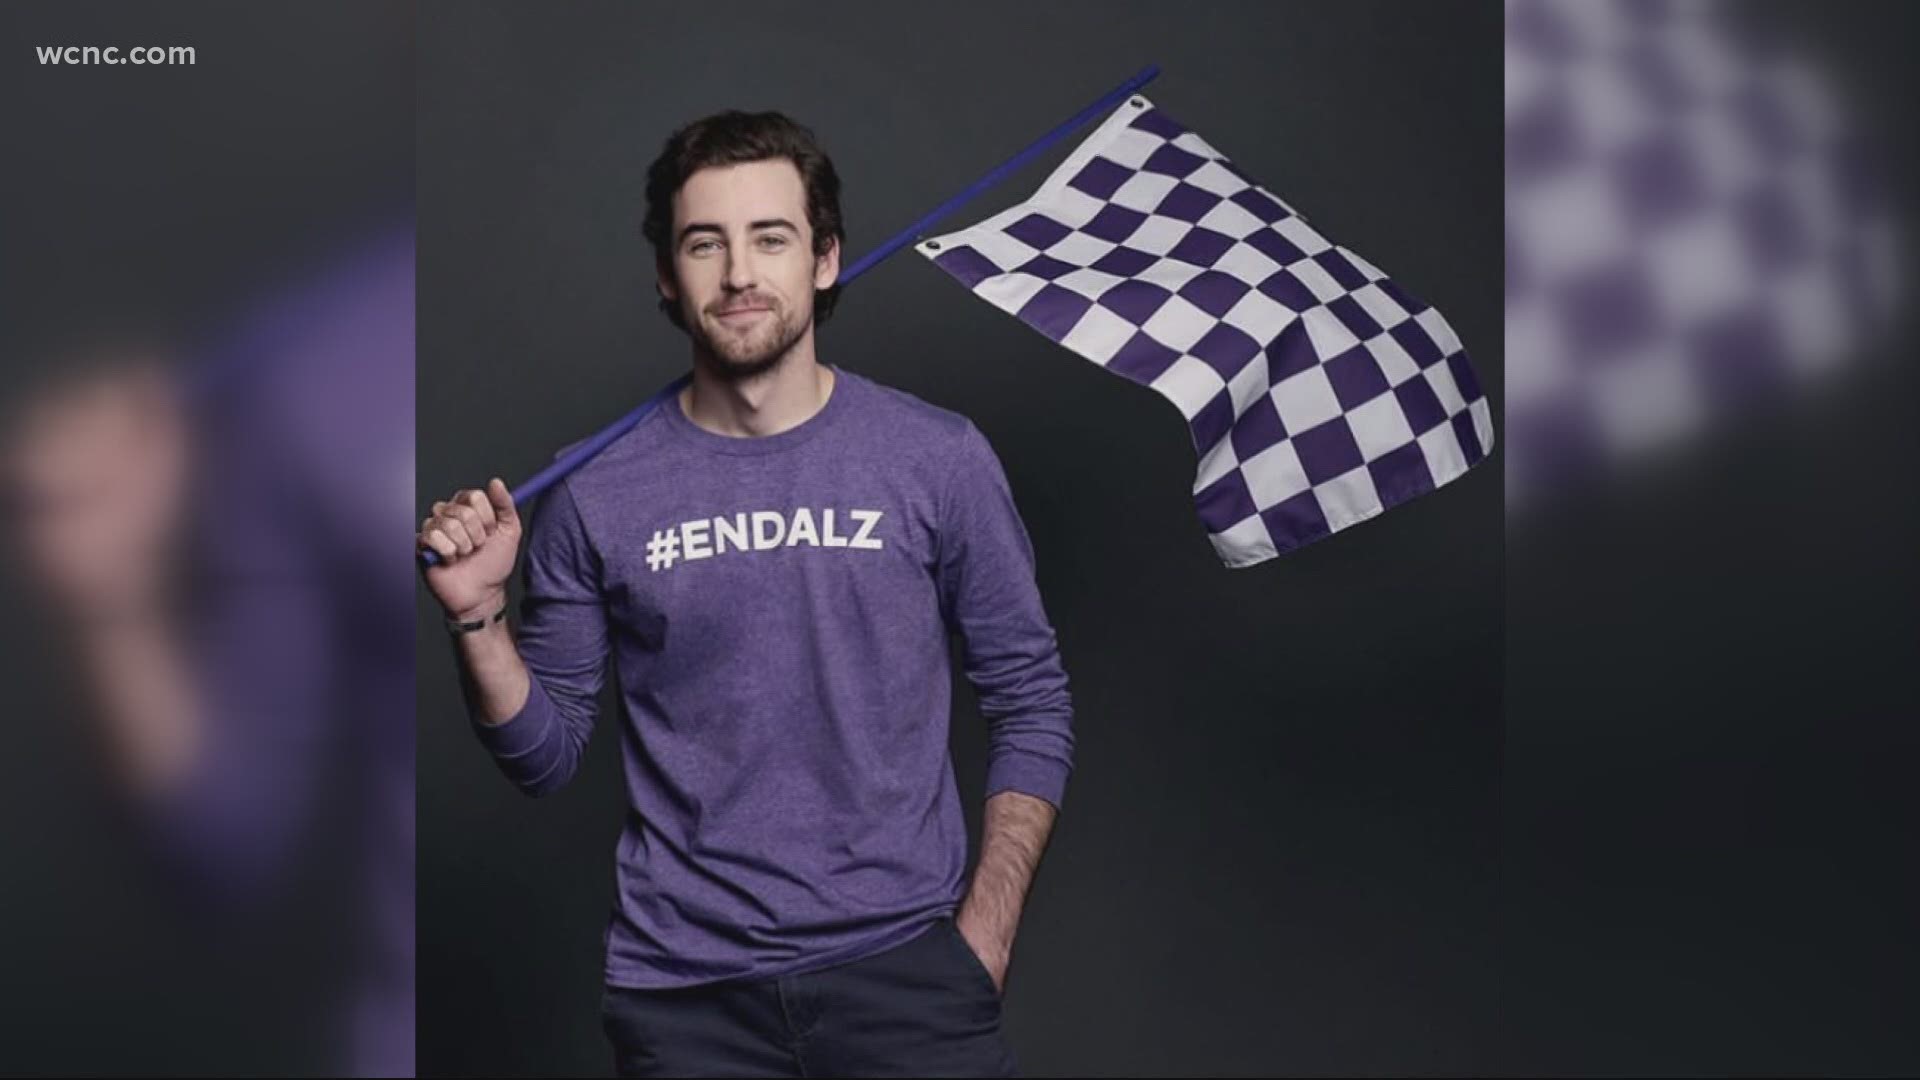 The Blaney family's passion for promoting brain health comes from their grandfather's battle with Alzheimer's disease.